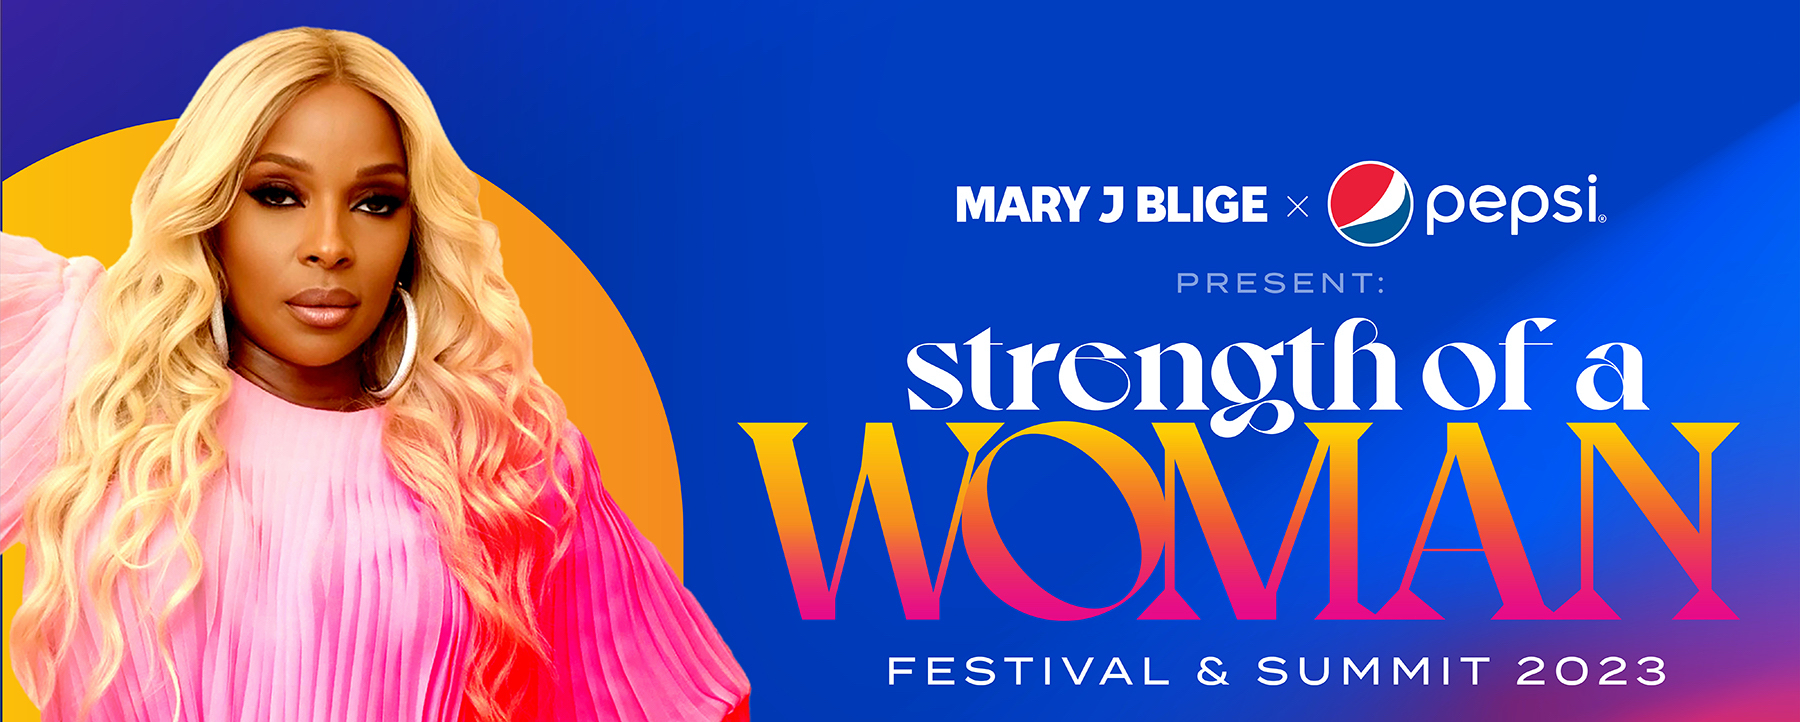 Mary J. Blige's 'Strength of a Woman Festival Returns with AllStar